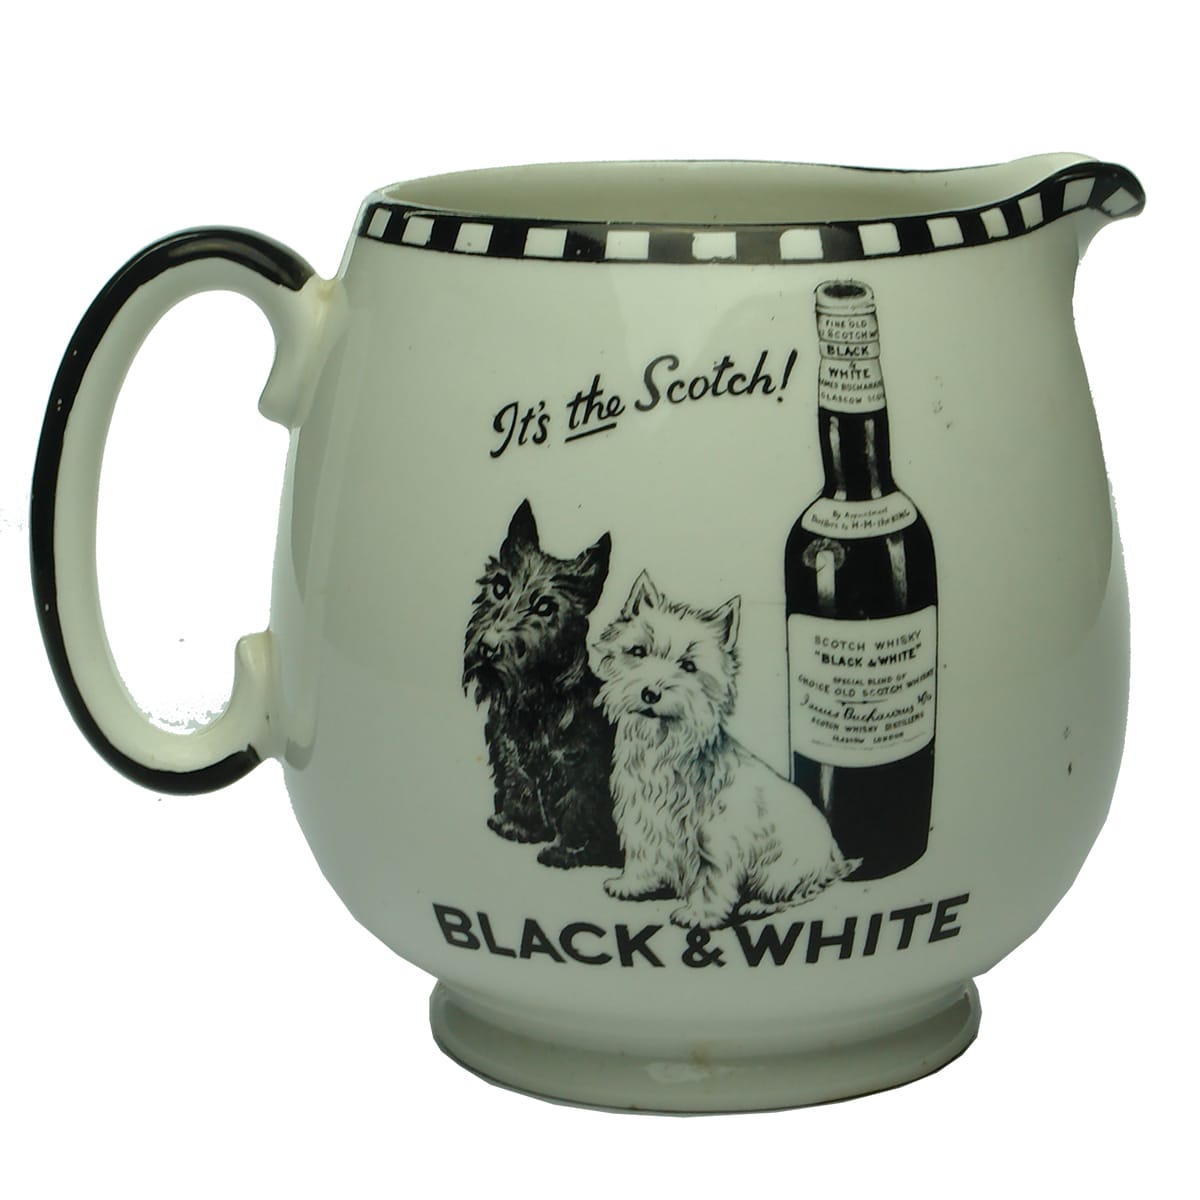 Whisky. Black & White Scotch Whisky. Two Dogs and Bottle. Shelley. Water Jug.